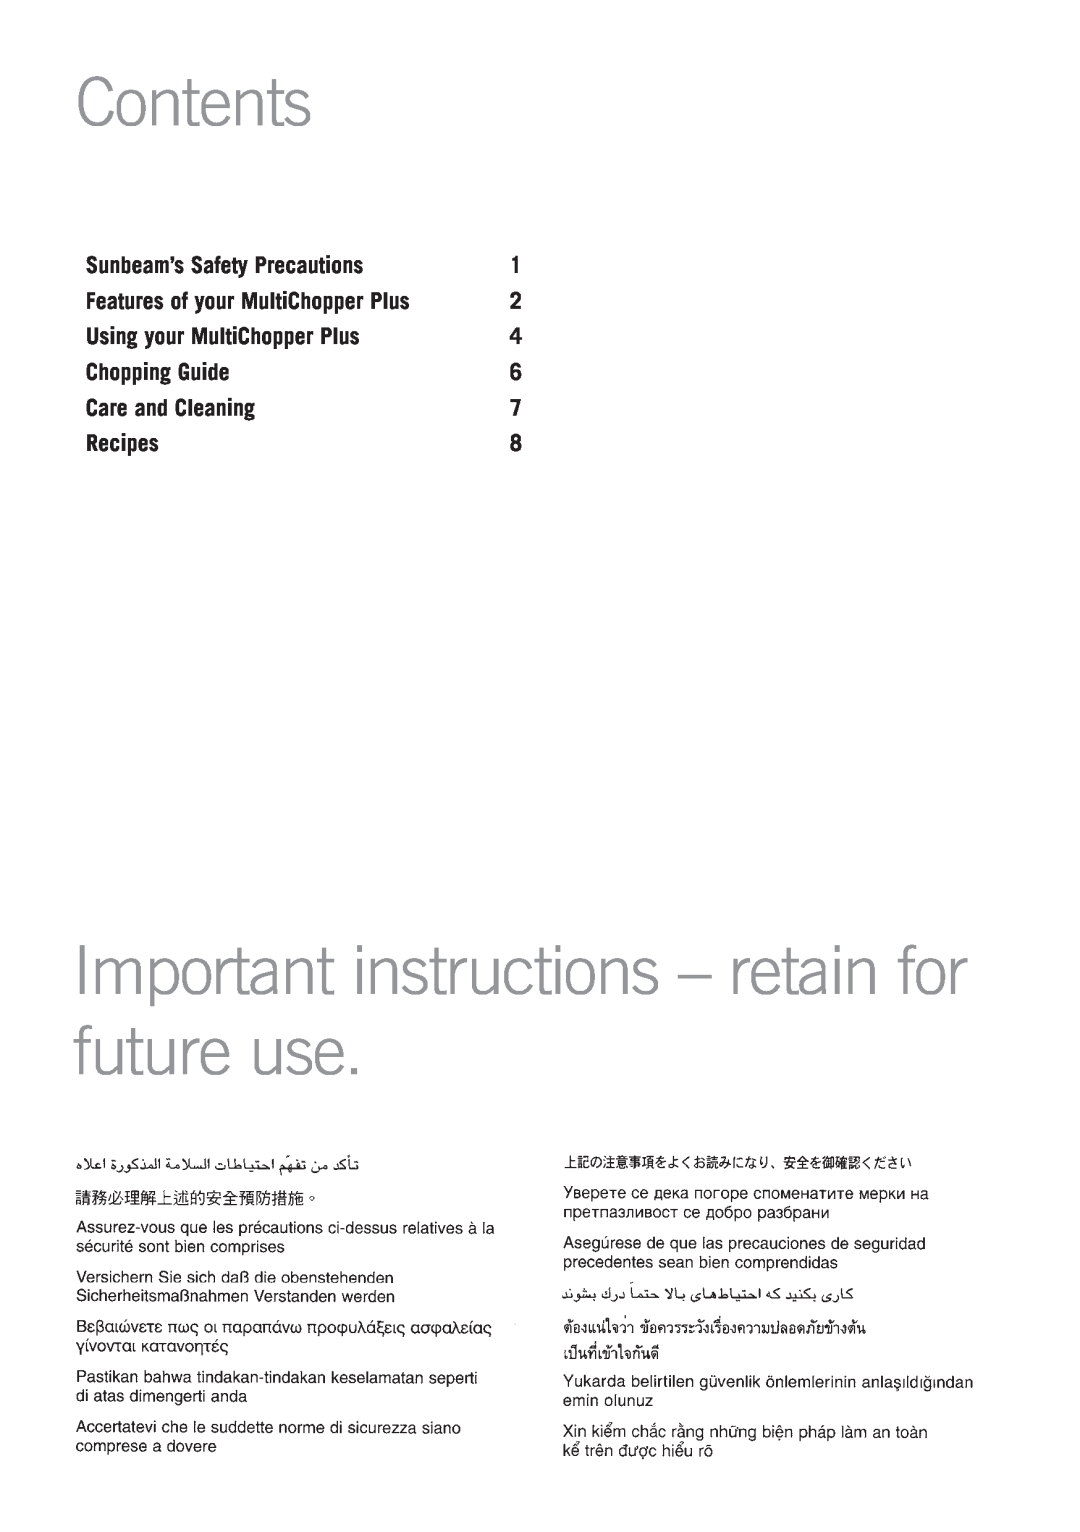 Sunbeam FC8600 Contents, Important instructions - retain for future use, Sunbeam’s Safety Precautions, Chopping Guide 